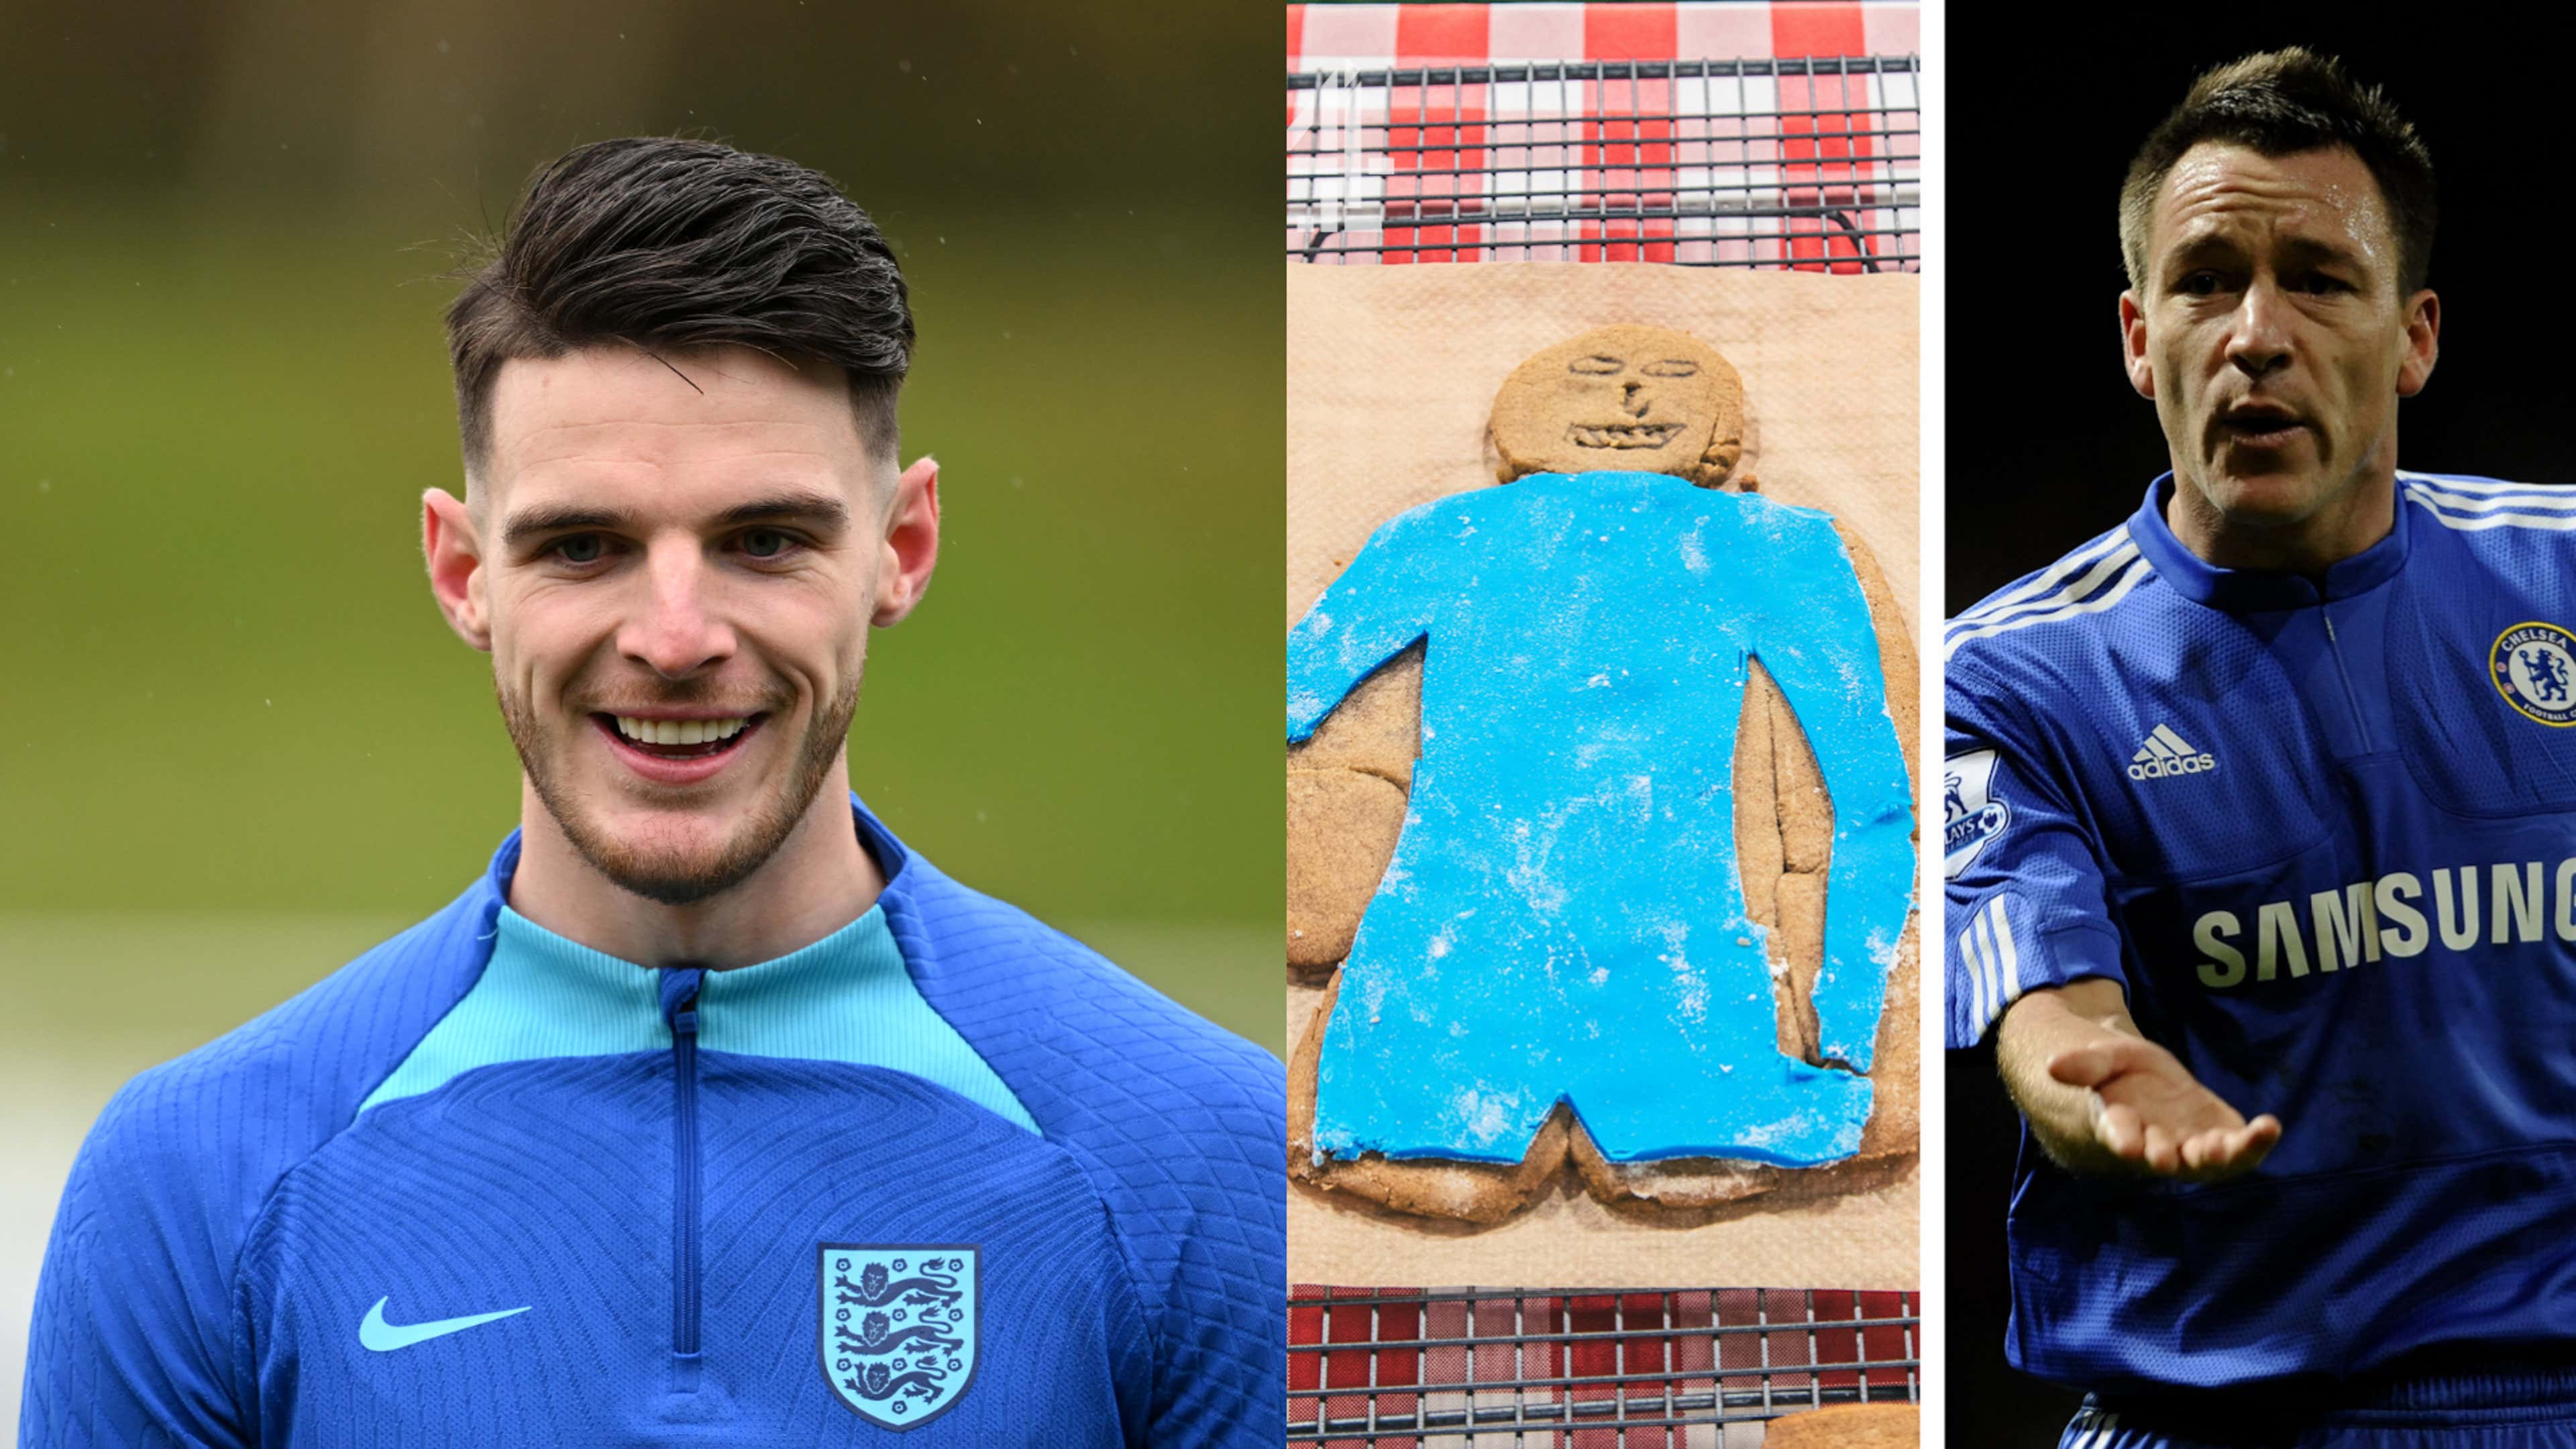 Declan Rice and his England teammates were set a baking challenge.